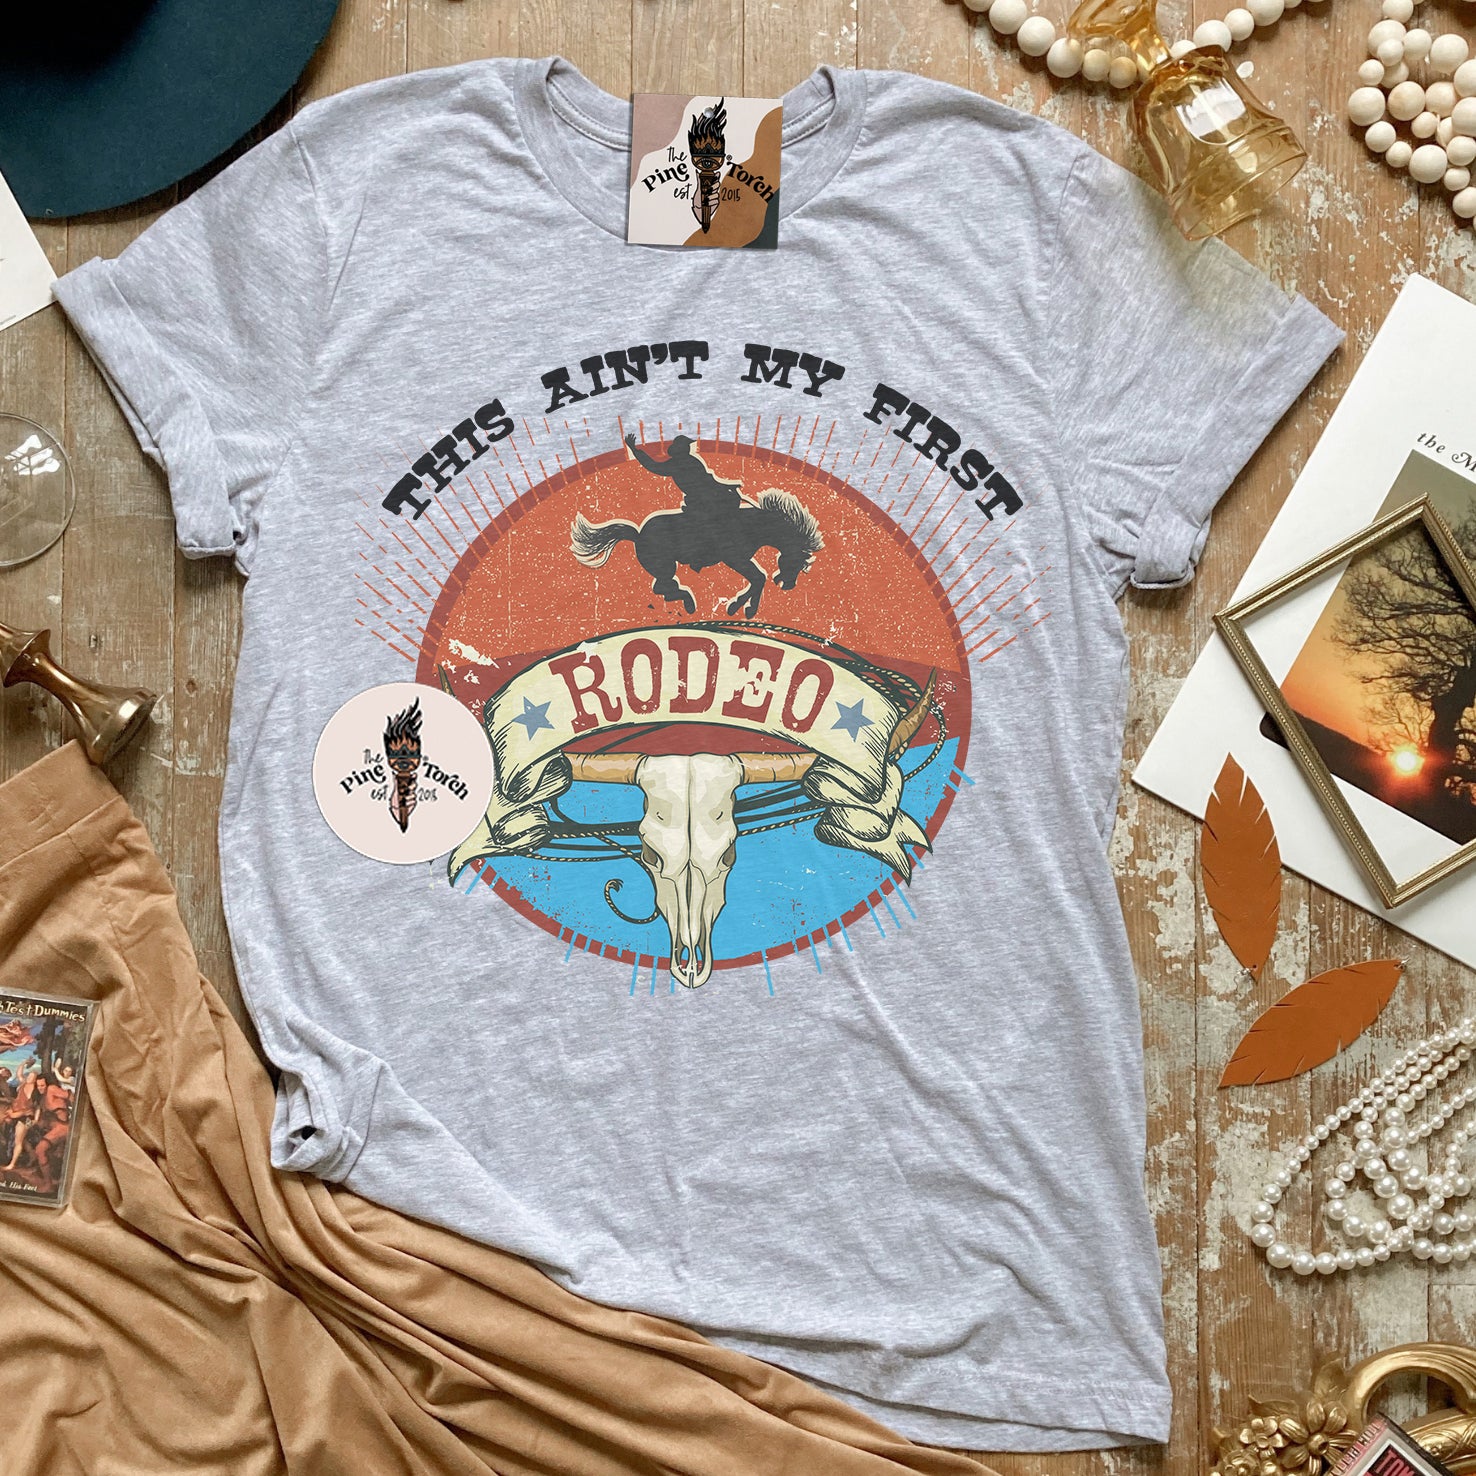 THIS AIN'T MY FIRST RODEO // UNISEX TEE